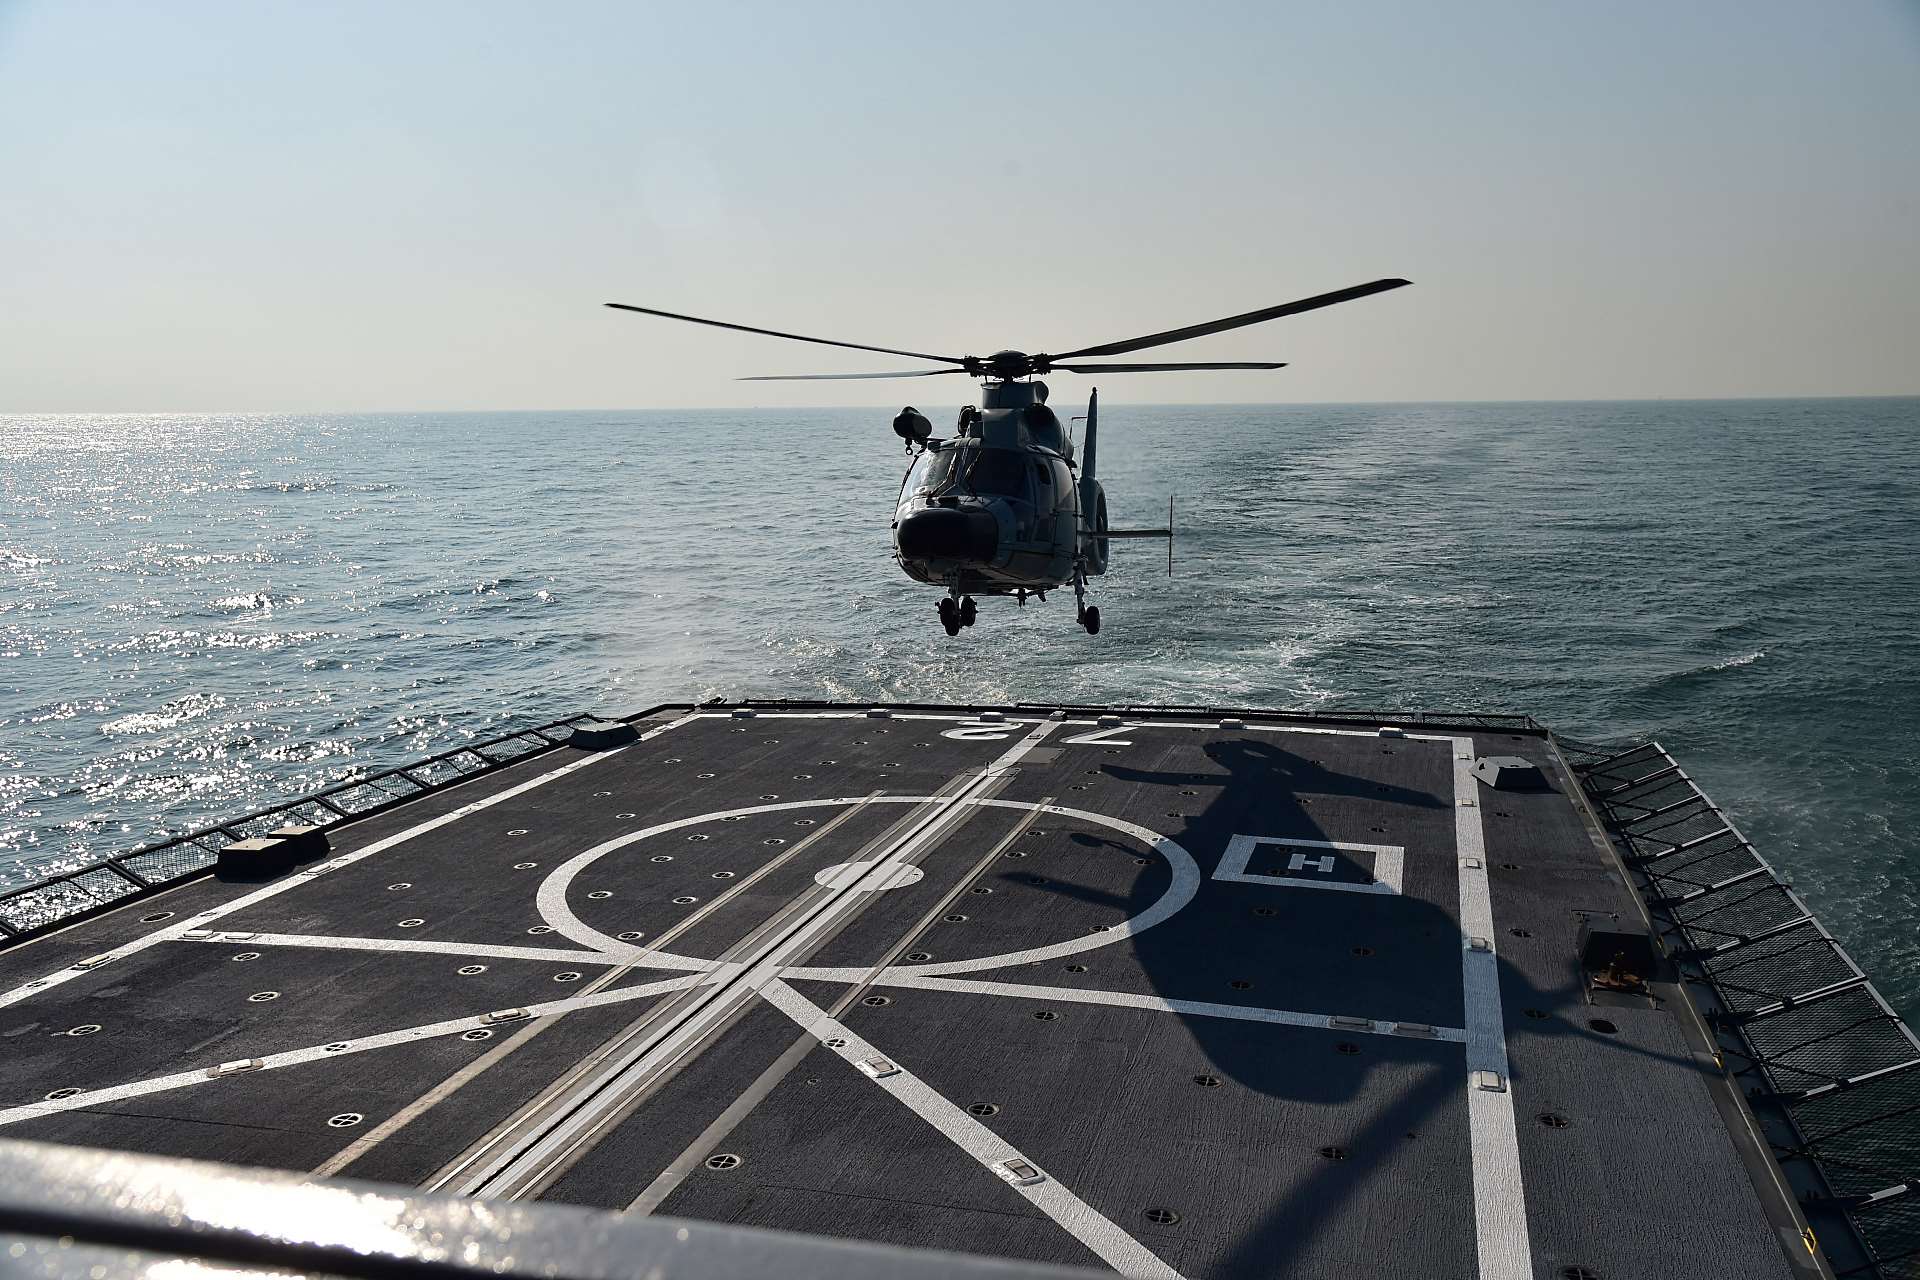 PLAN Harbin Z-9 helicopter landing on the helicopter deck of RSS Stalwart during the helicopter cross-deck landing drill.